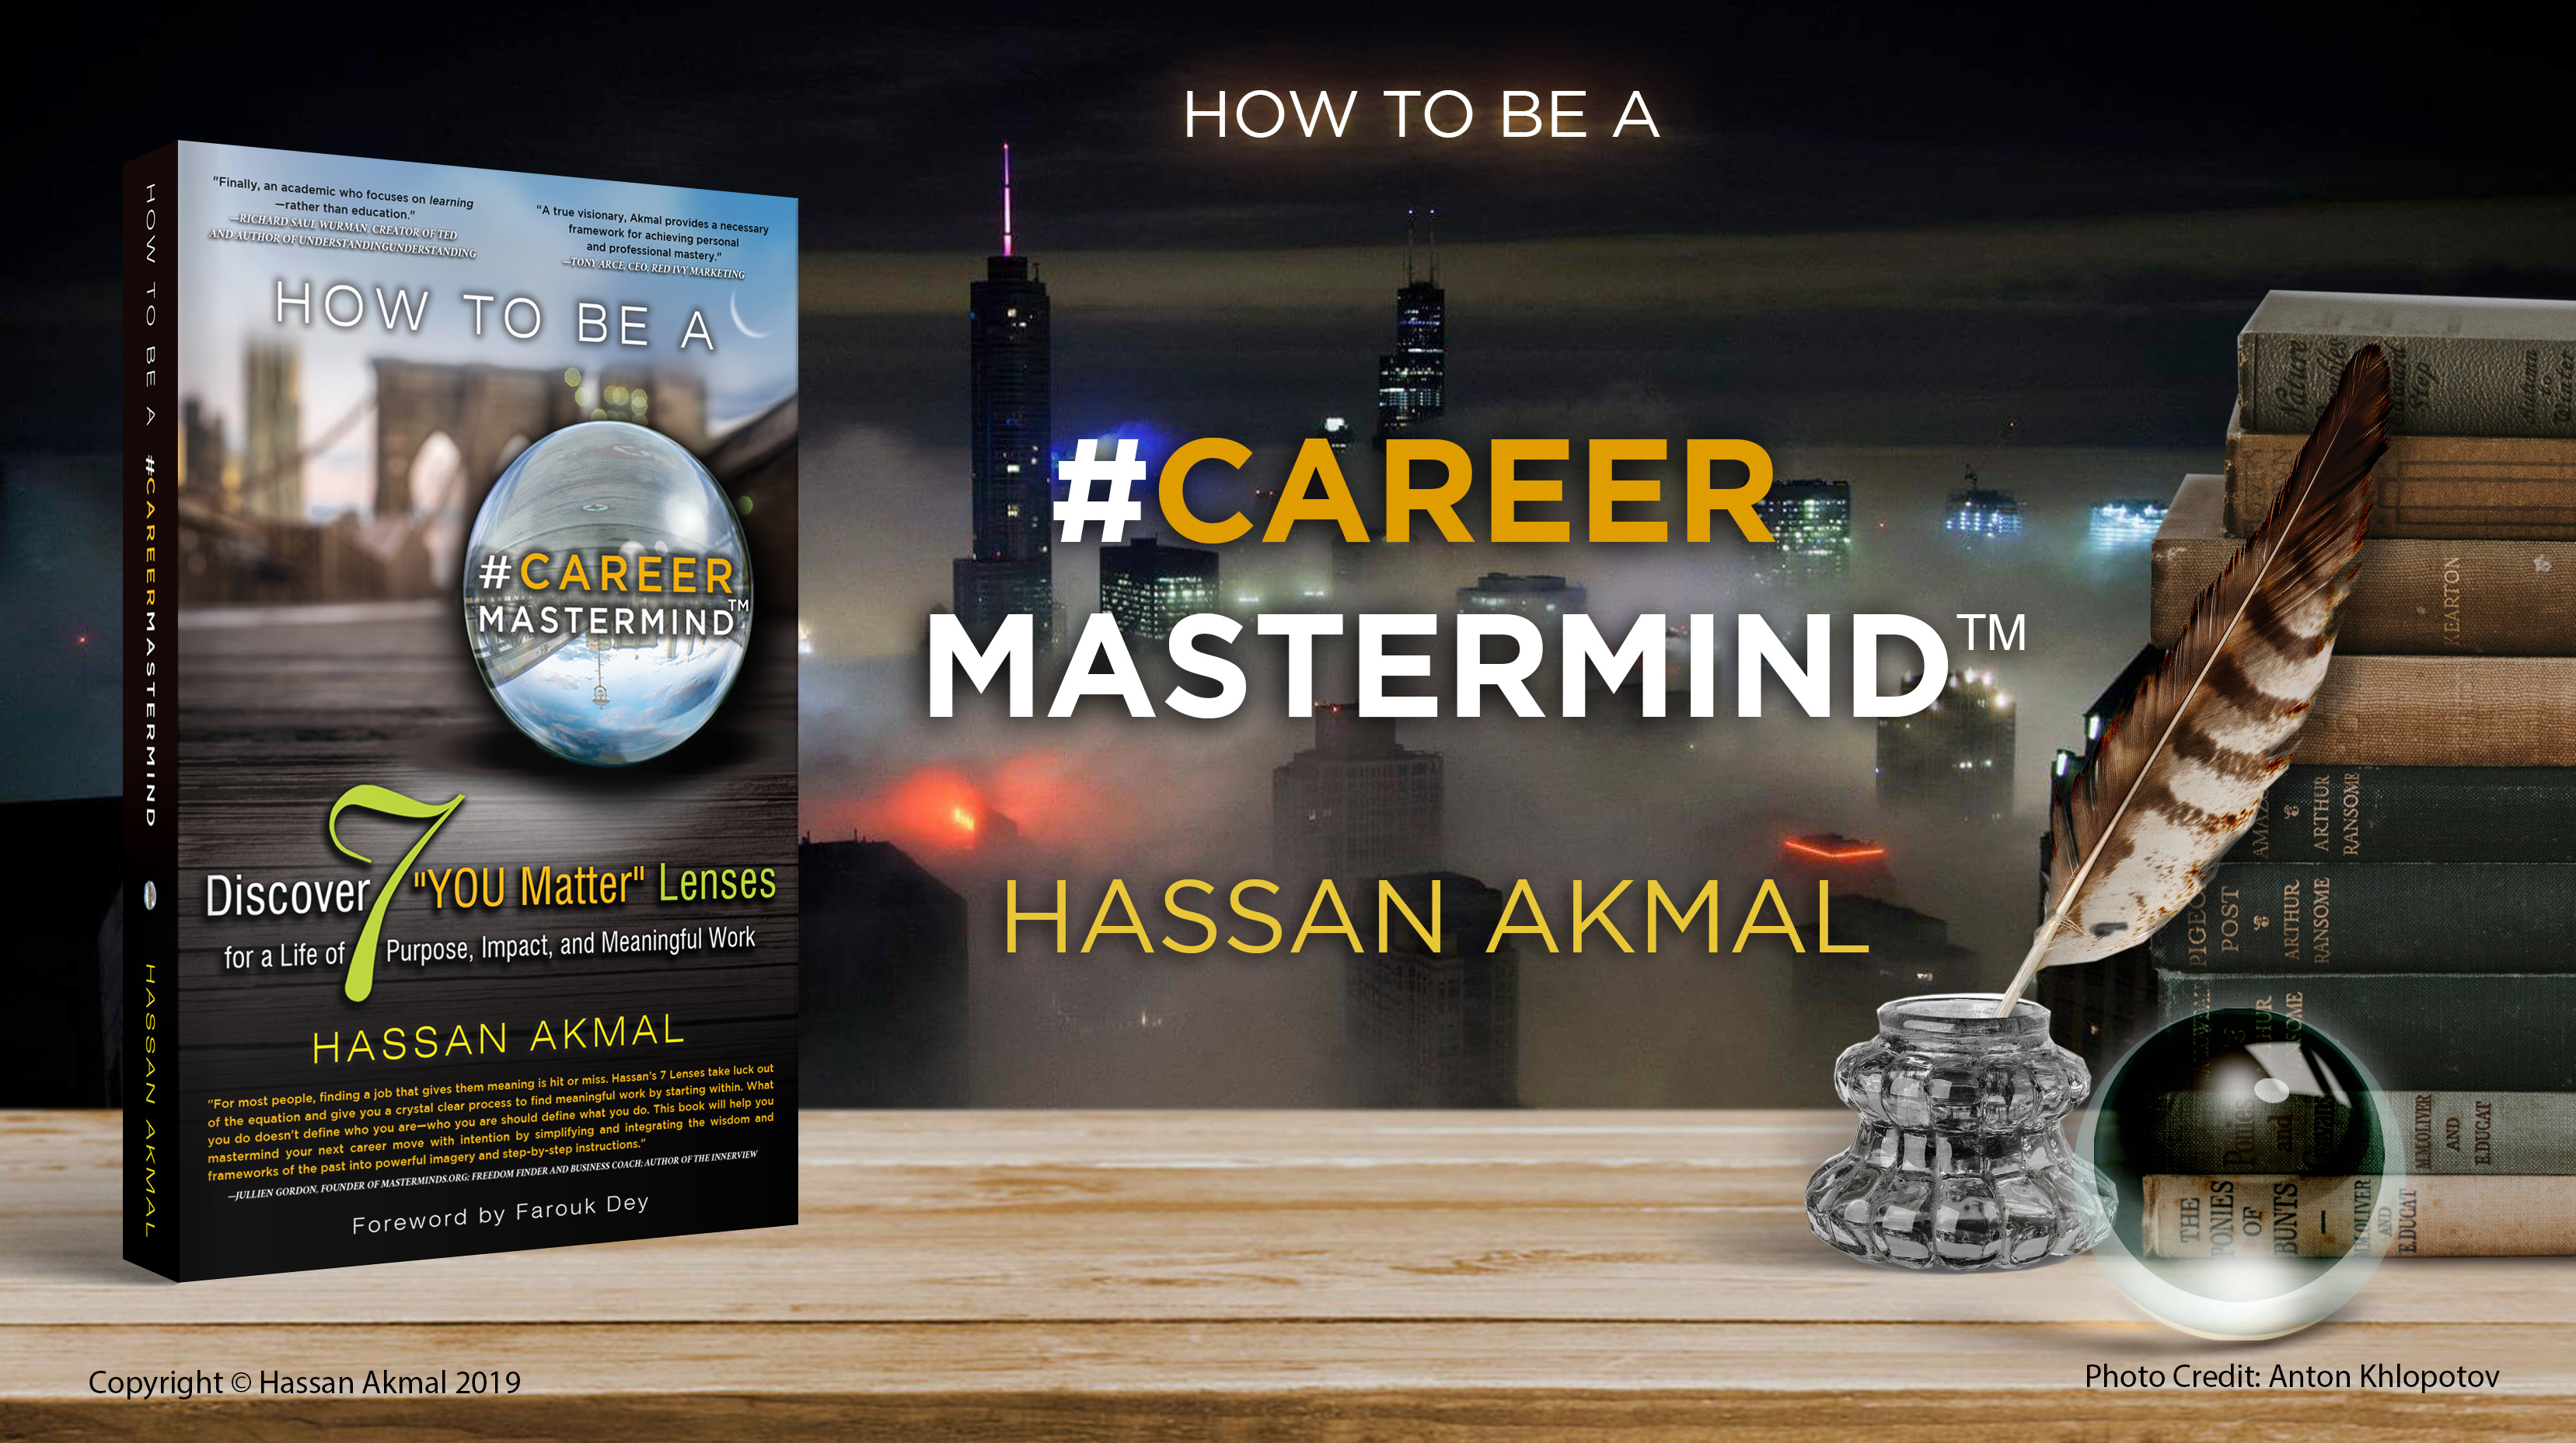 How to be a Career Mastermind